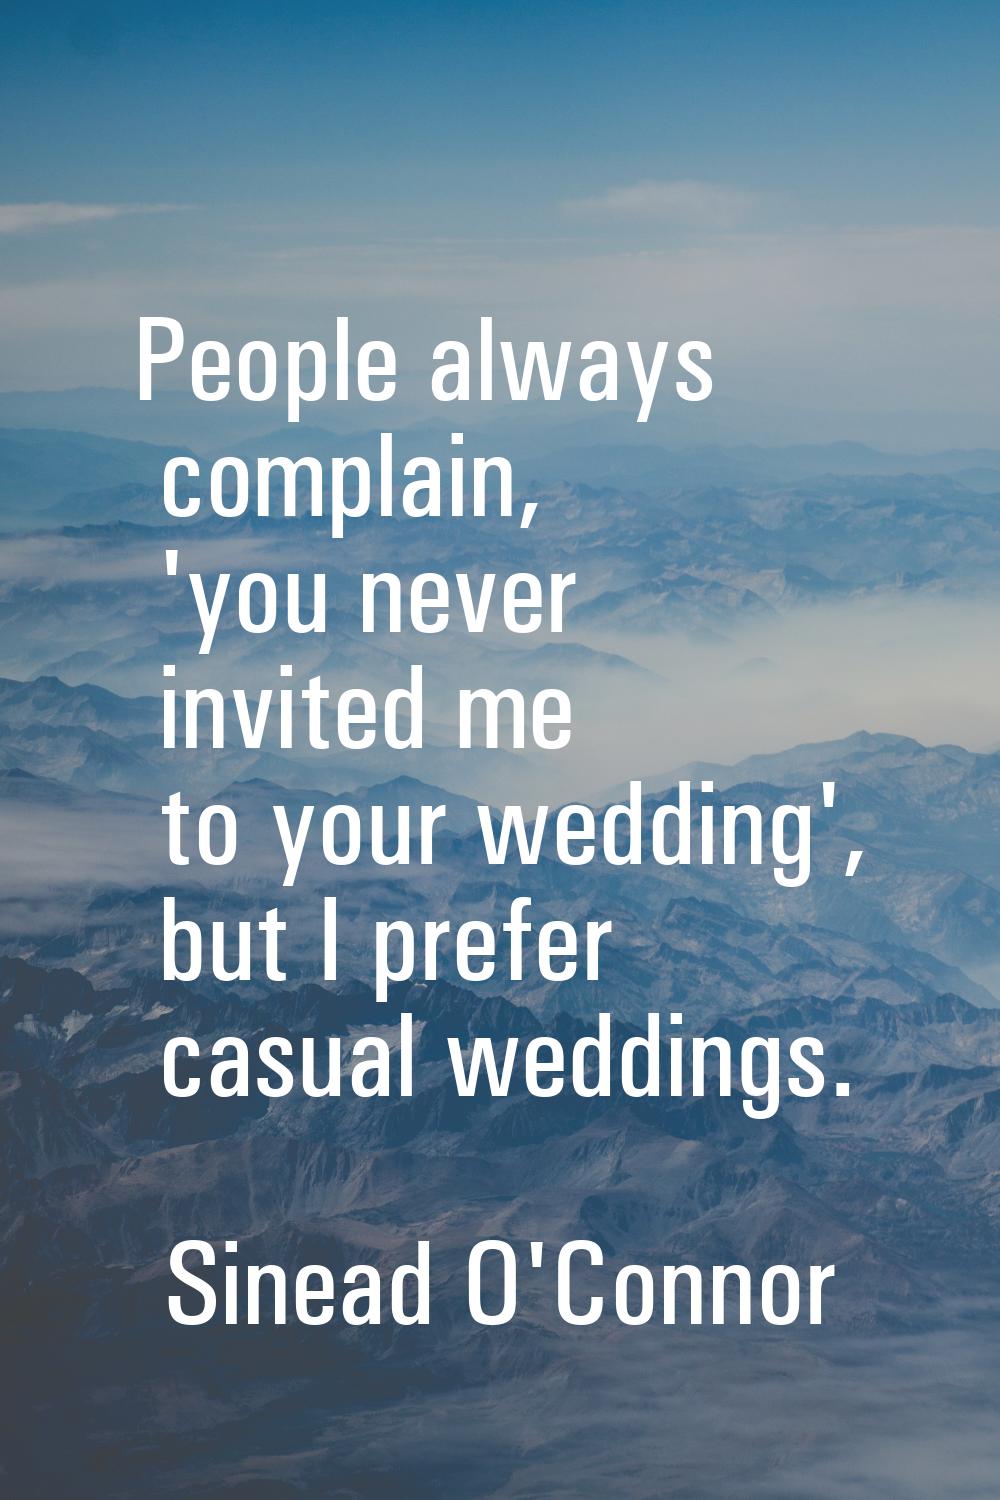 People always complain, 'you never invited me to your wedding', but I prefer casual weddings.